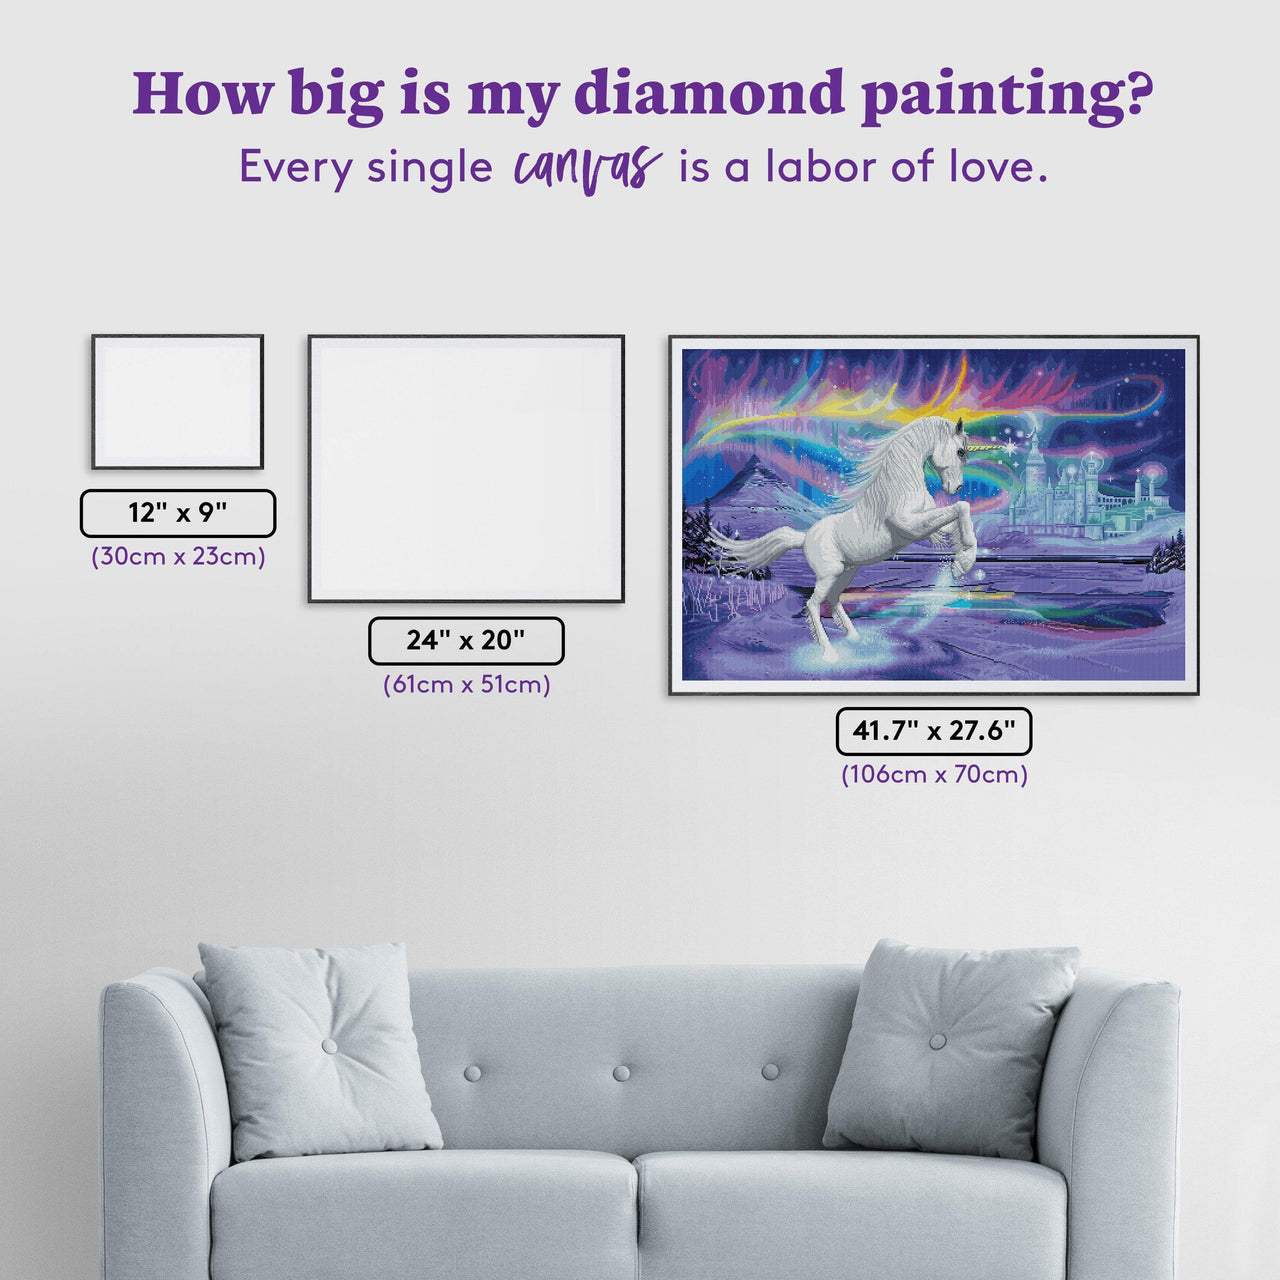 Diamond Painting Starborn Unicorn 41.7" x 27.6" (106cm x 70cm) / Square with 57 Colors including 5 ABs / 116,340